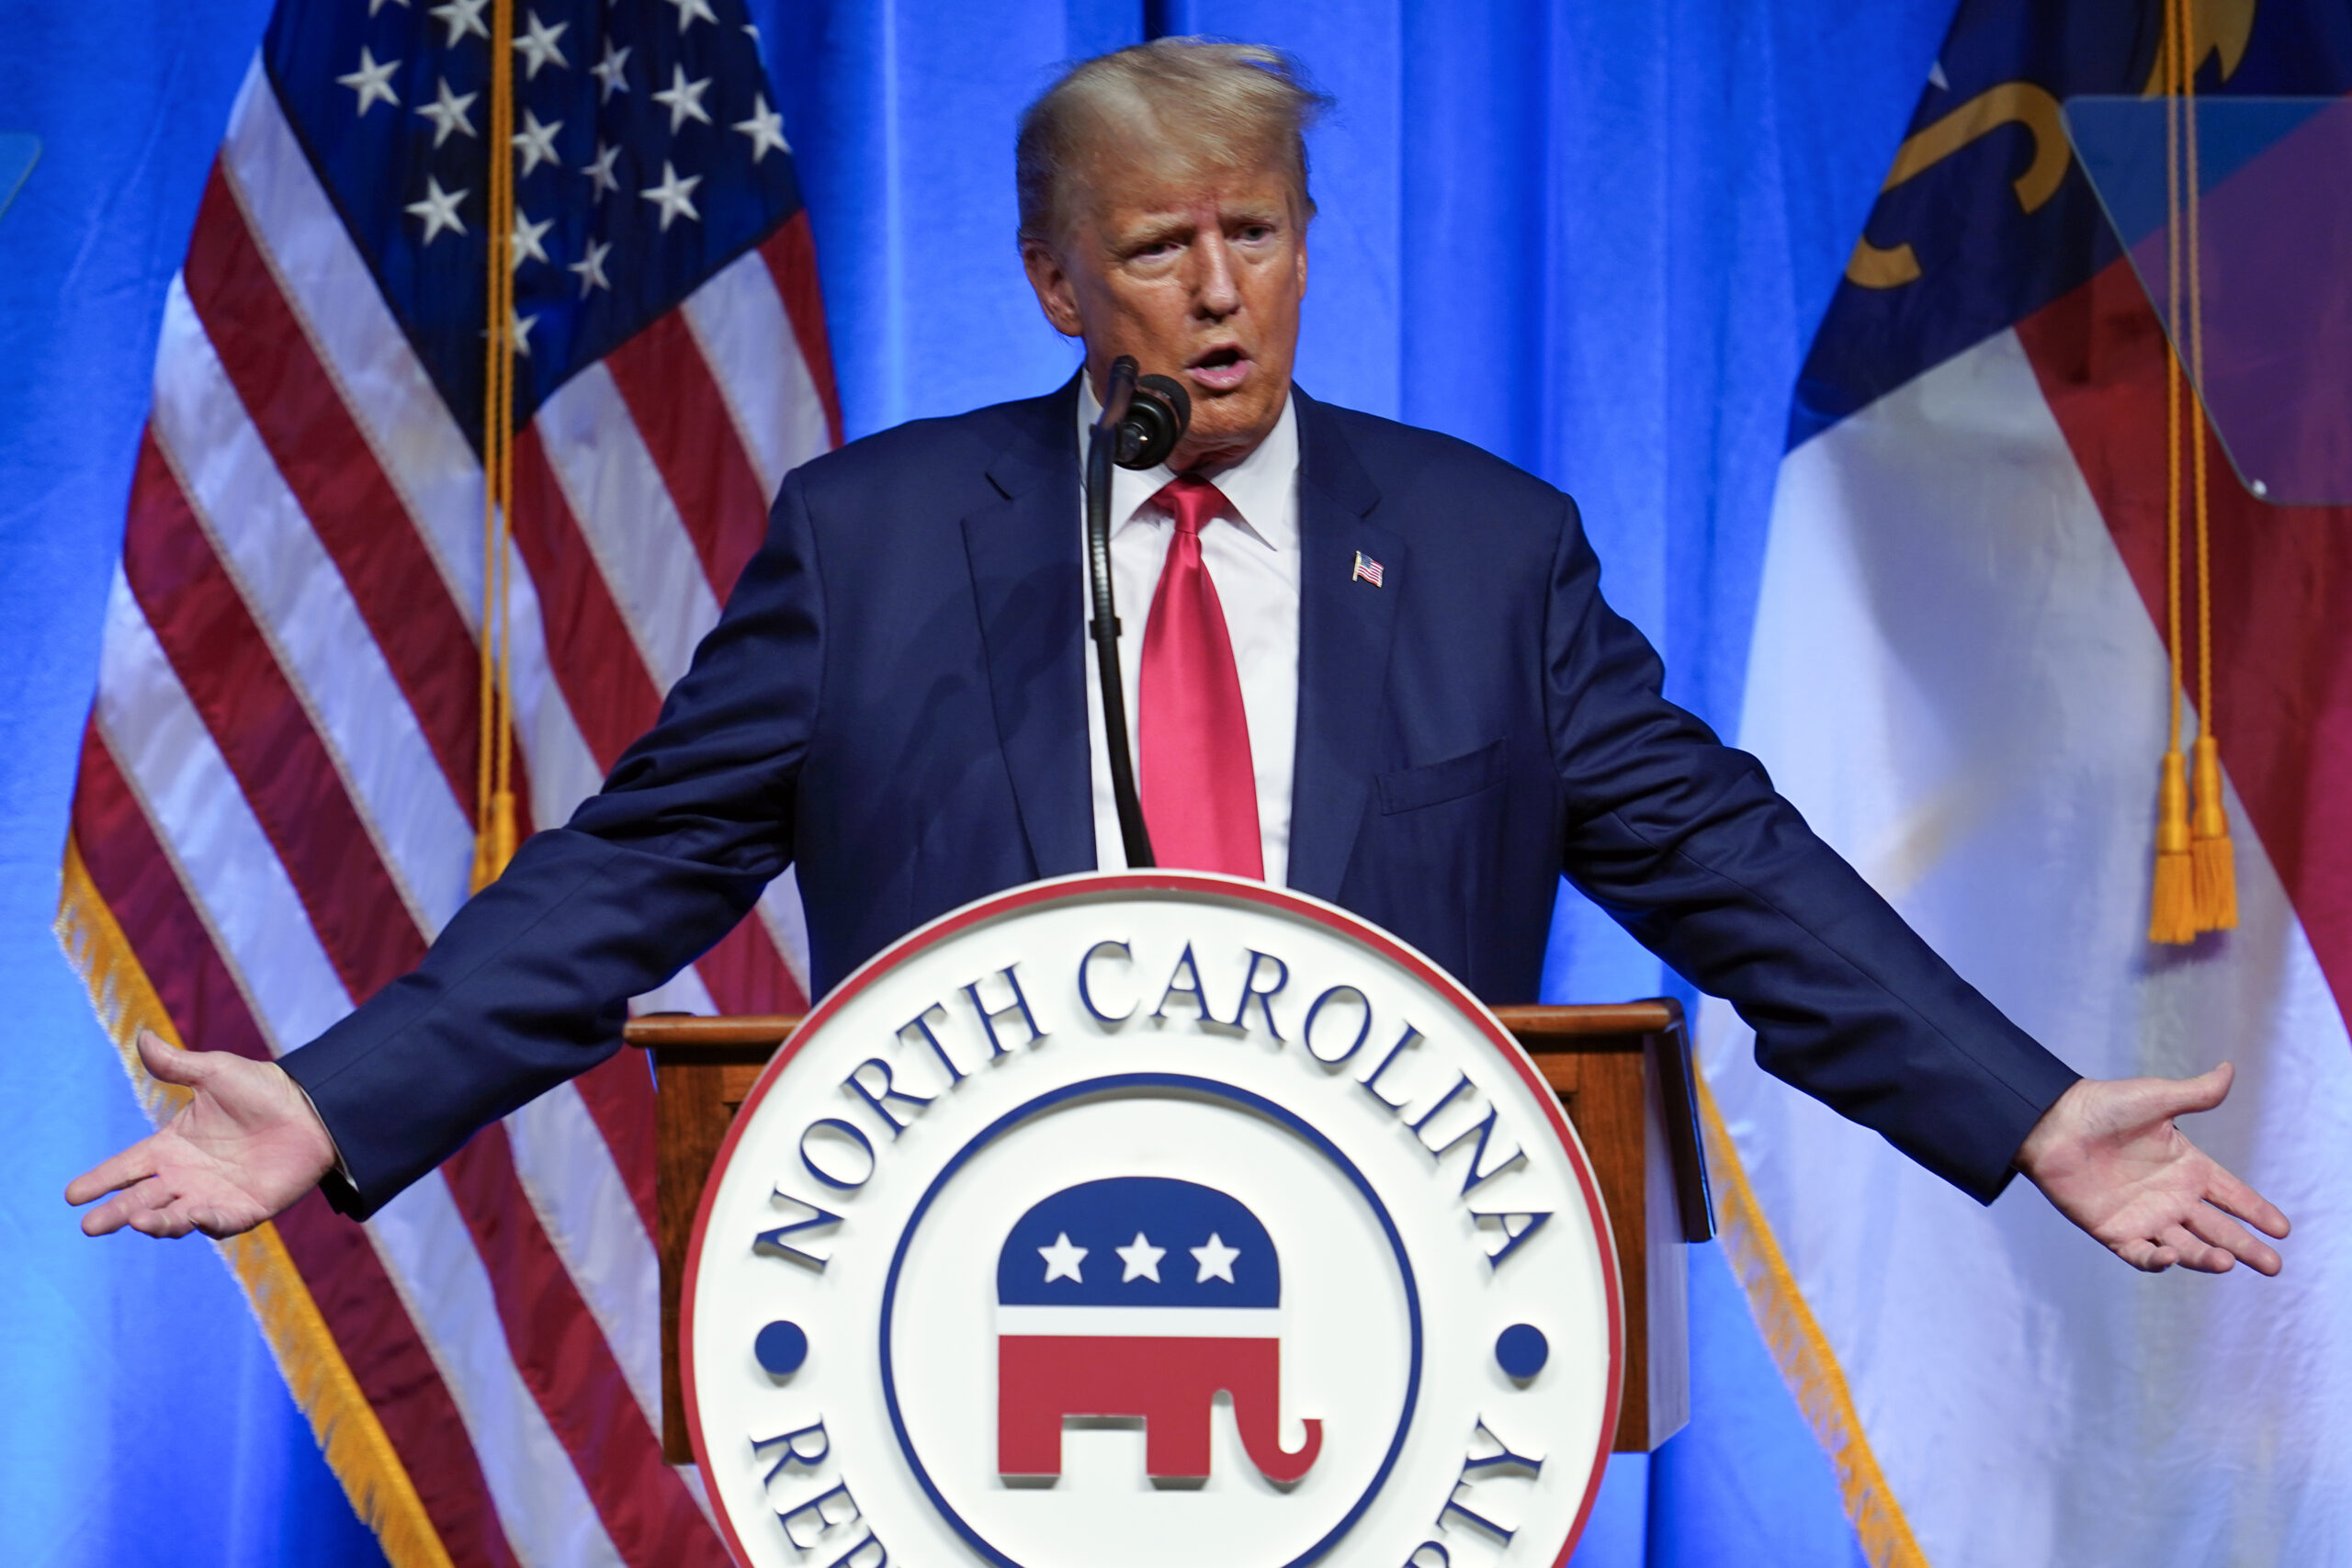 Former President Donald Trump speaks during the North Carolina Republican Party Convention in Green...